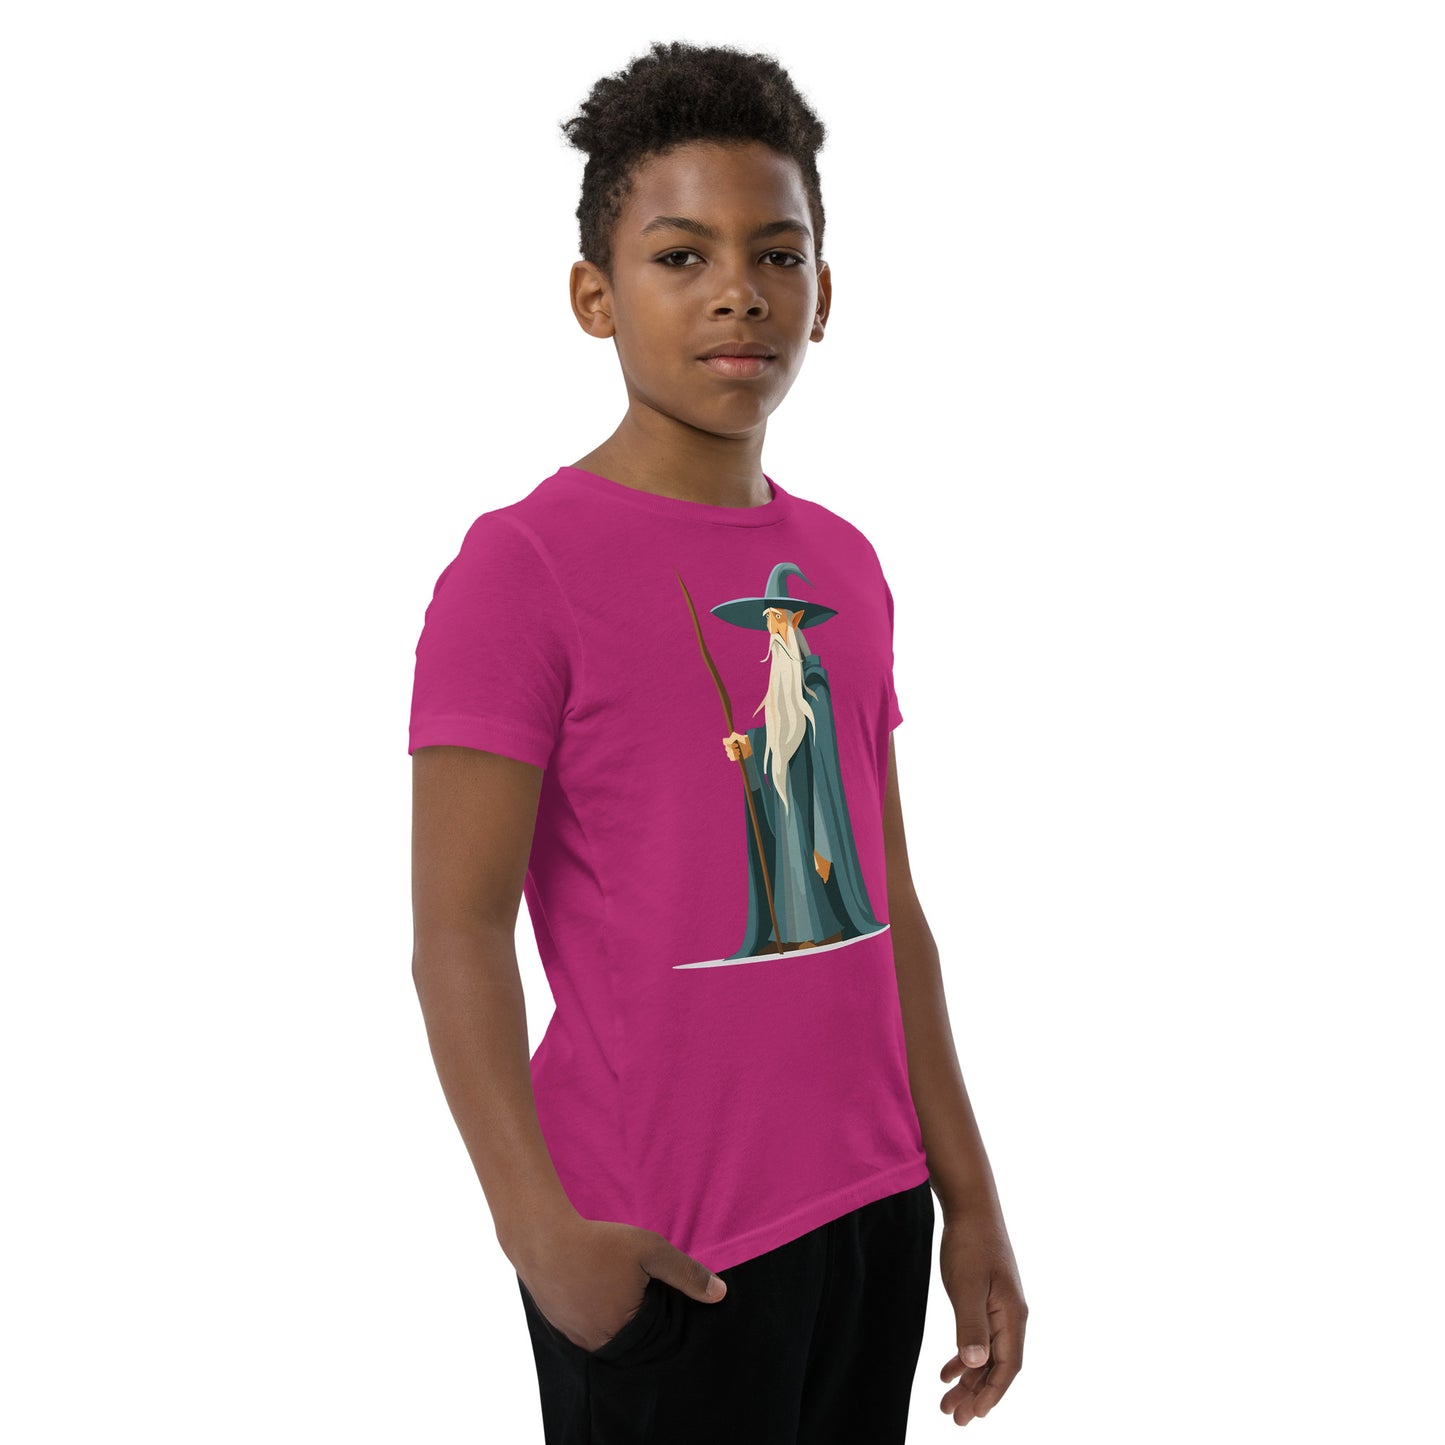 Boy with a berry T-shirt with a picture of a magician